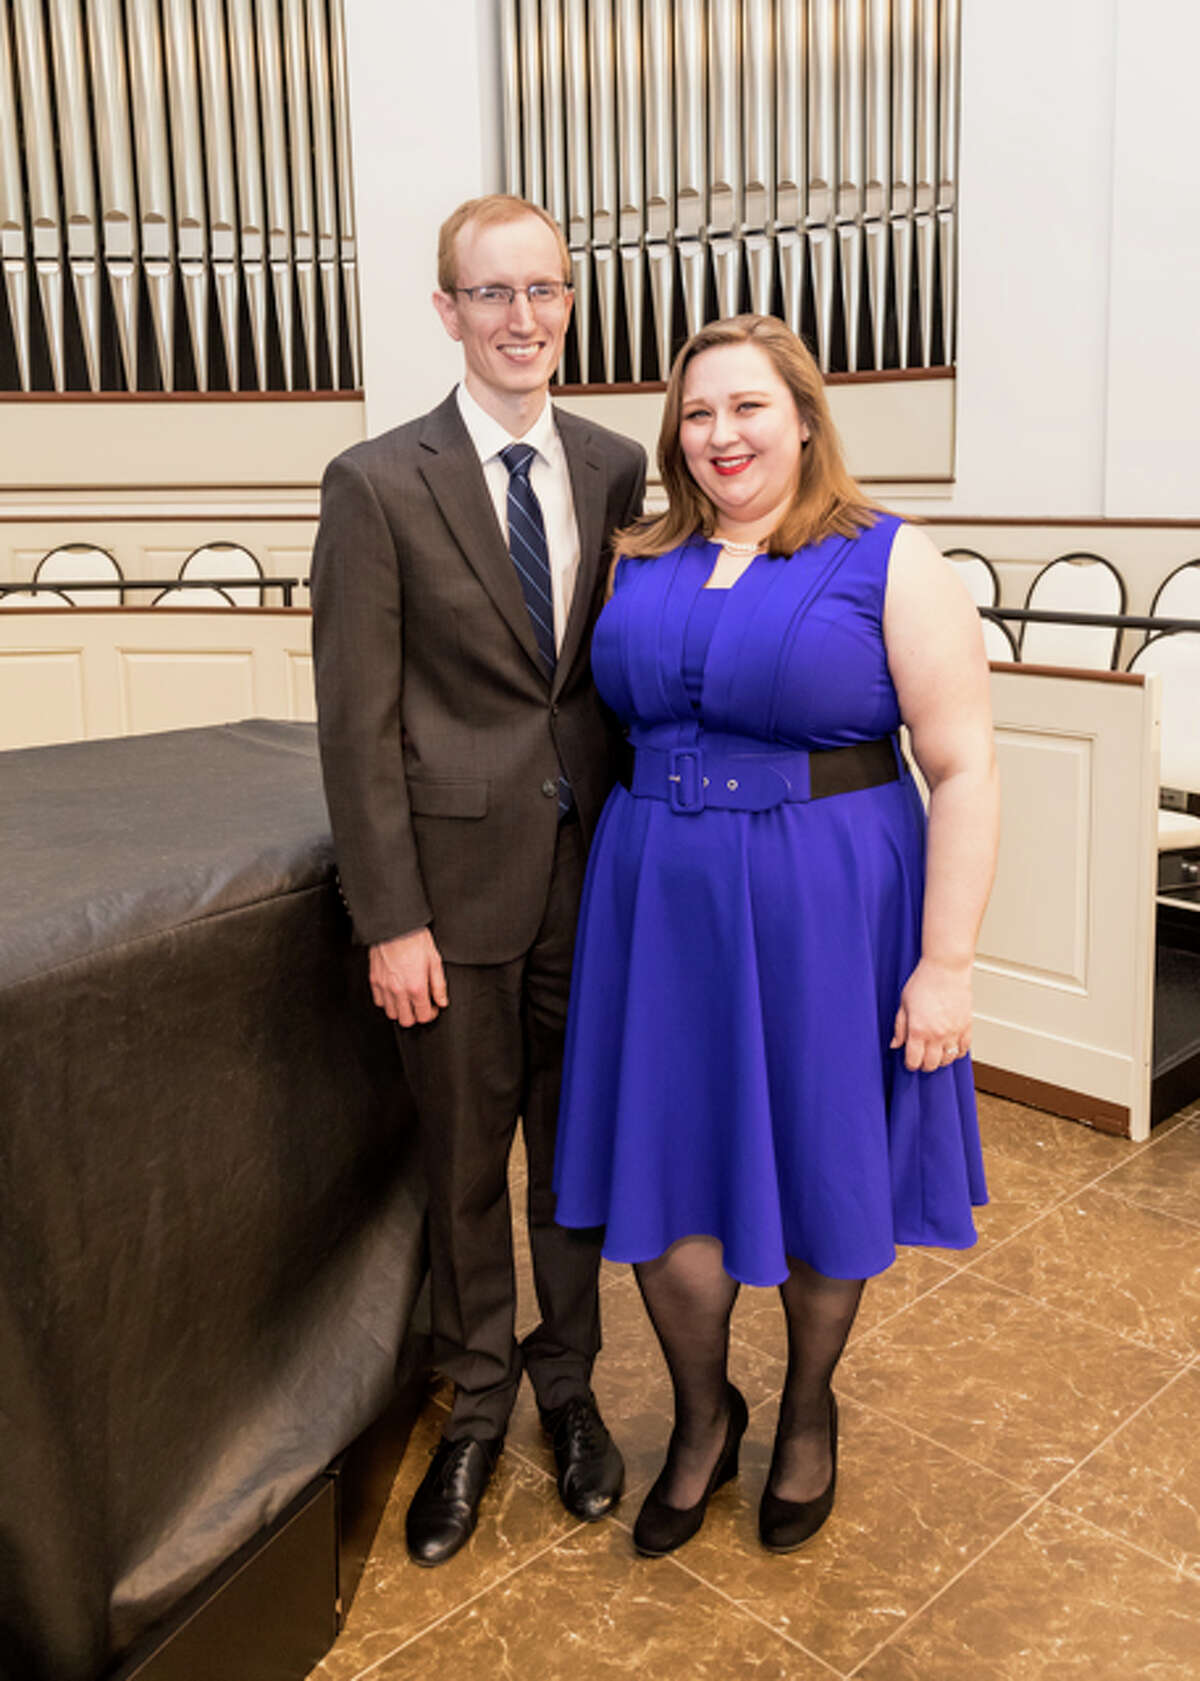 Collin and Erin Whitfield will present an Advent concert on Dec. 12 at Memorial Presbyterian Church.